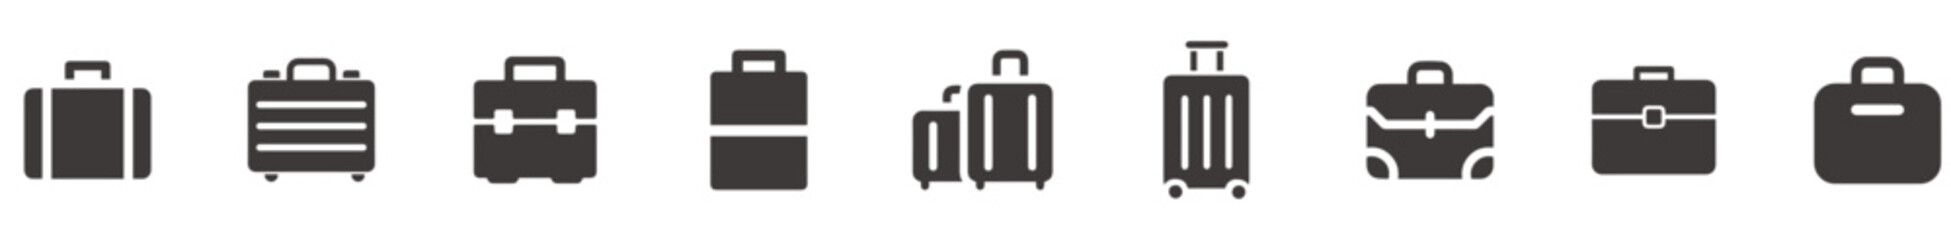 Set of suitcase and luggage bags. Vector icons of suitcases.